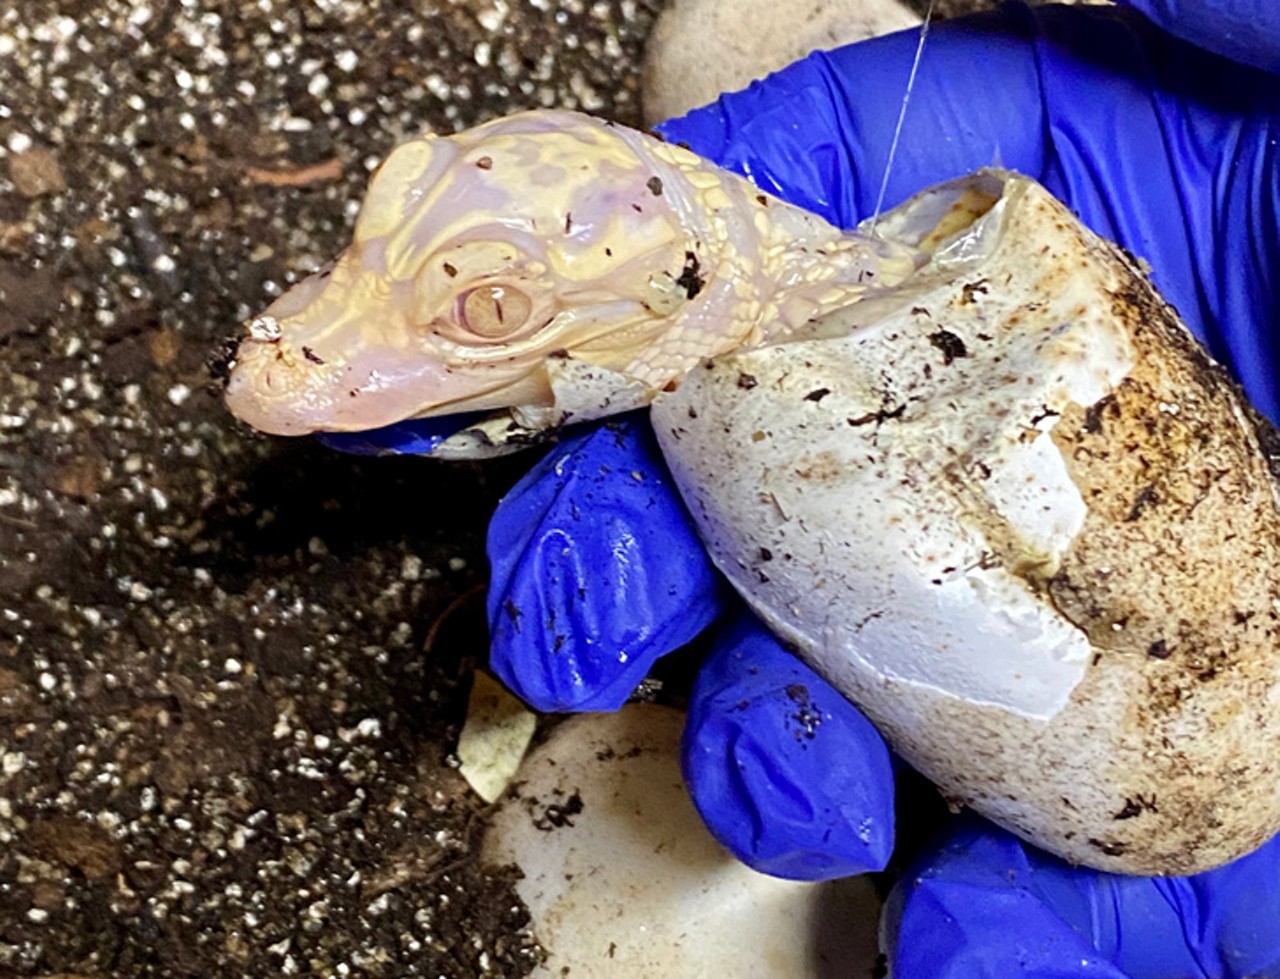 Photos of newly hatched albino alligators in Osceola County